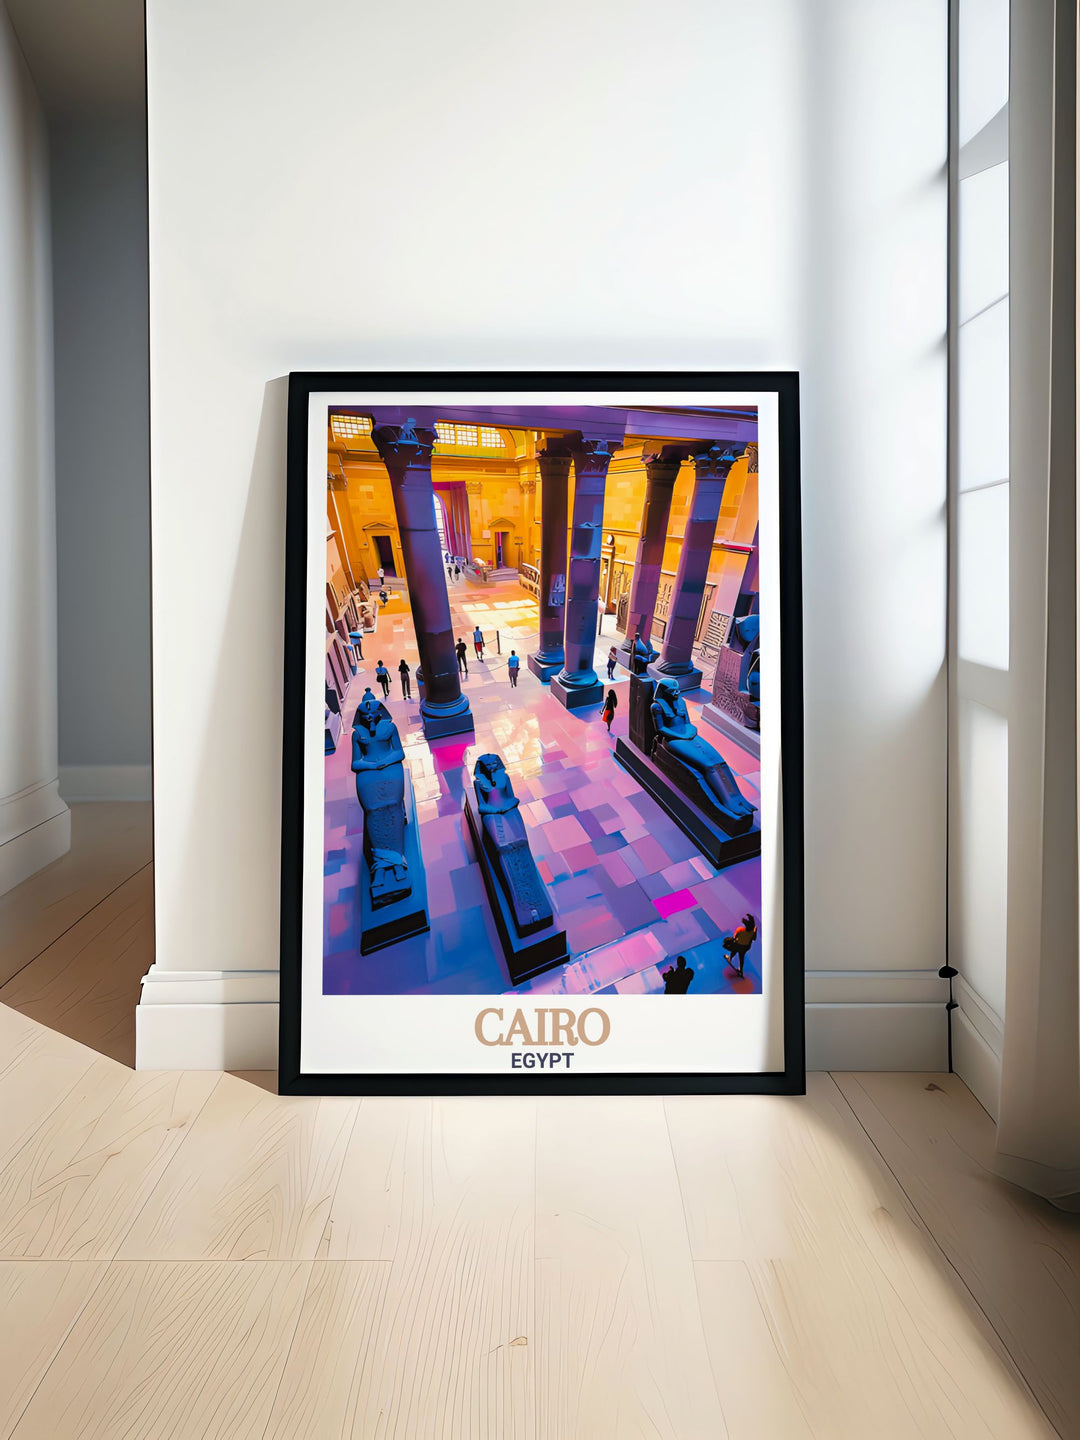 Discover the beauty of The Egyptian Museum with this stunning travel poster perfect for adding a touch of Cairos rich history to your home decor ideal for lovers of vintage posters and unique wall art.